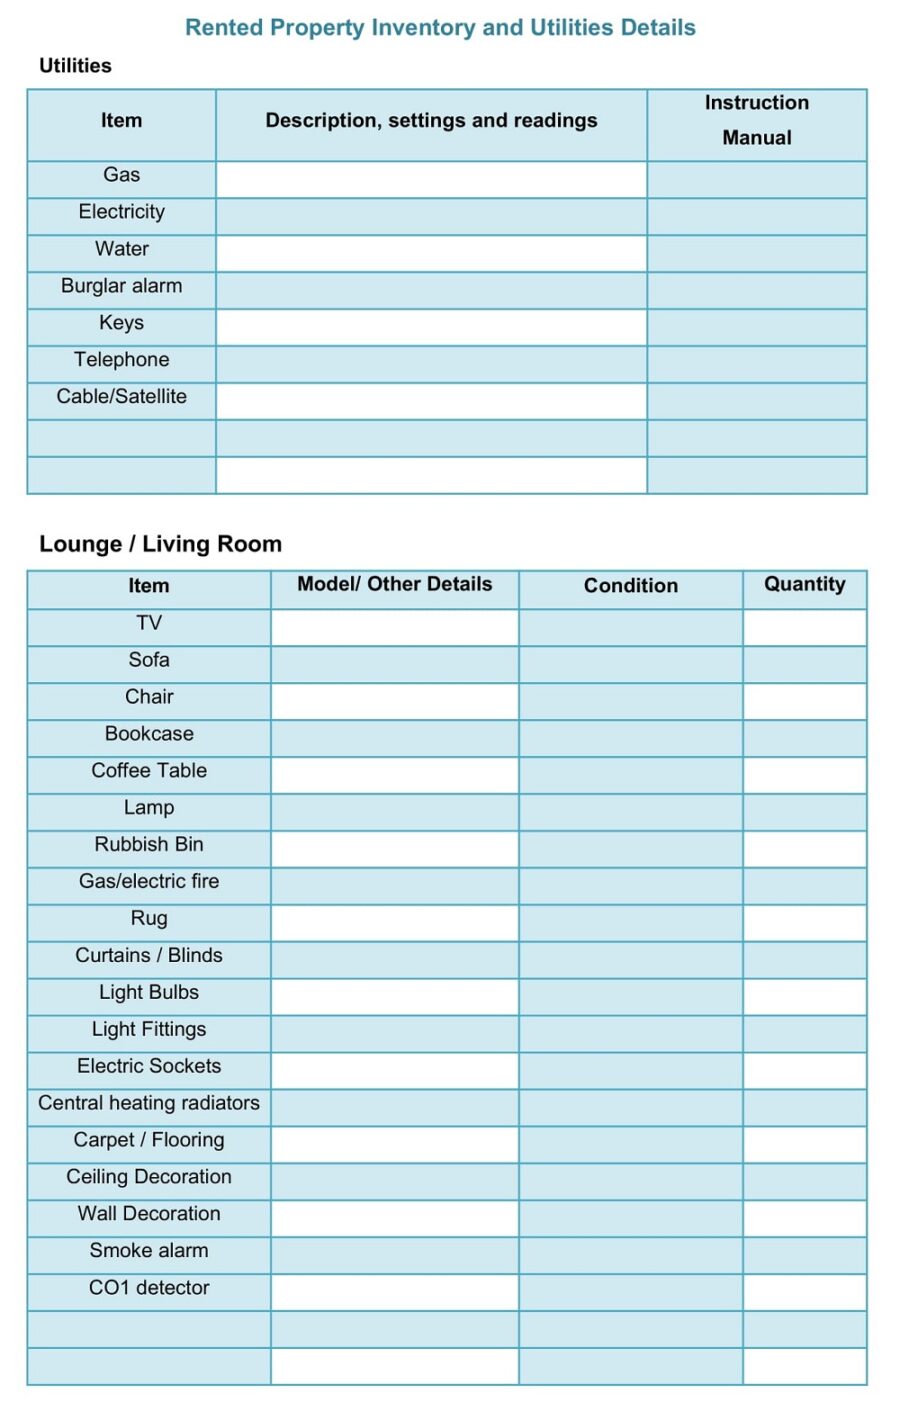 Rented Property Inventory And Utilities Template